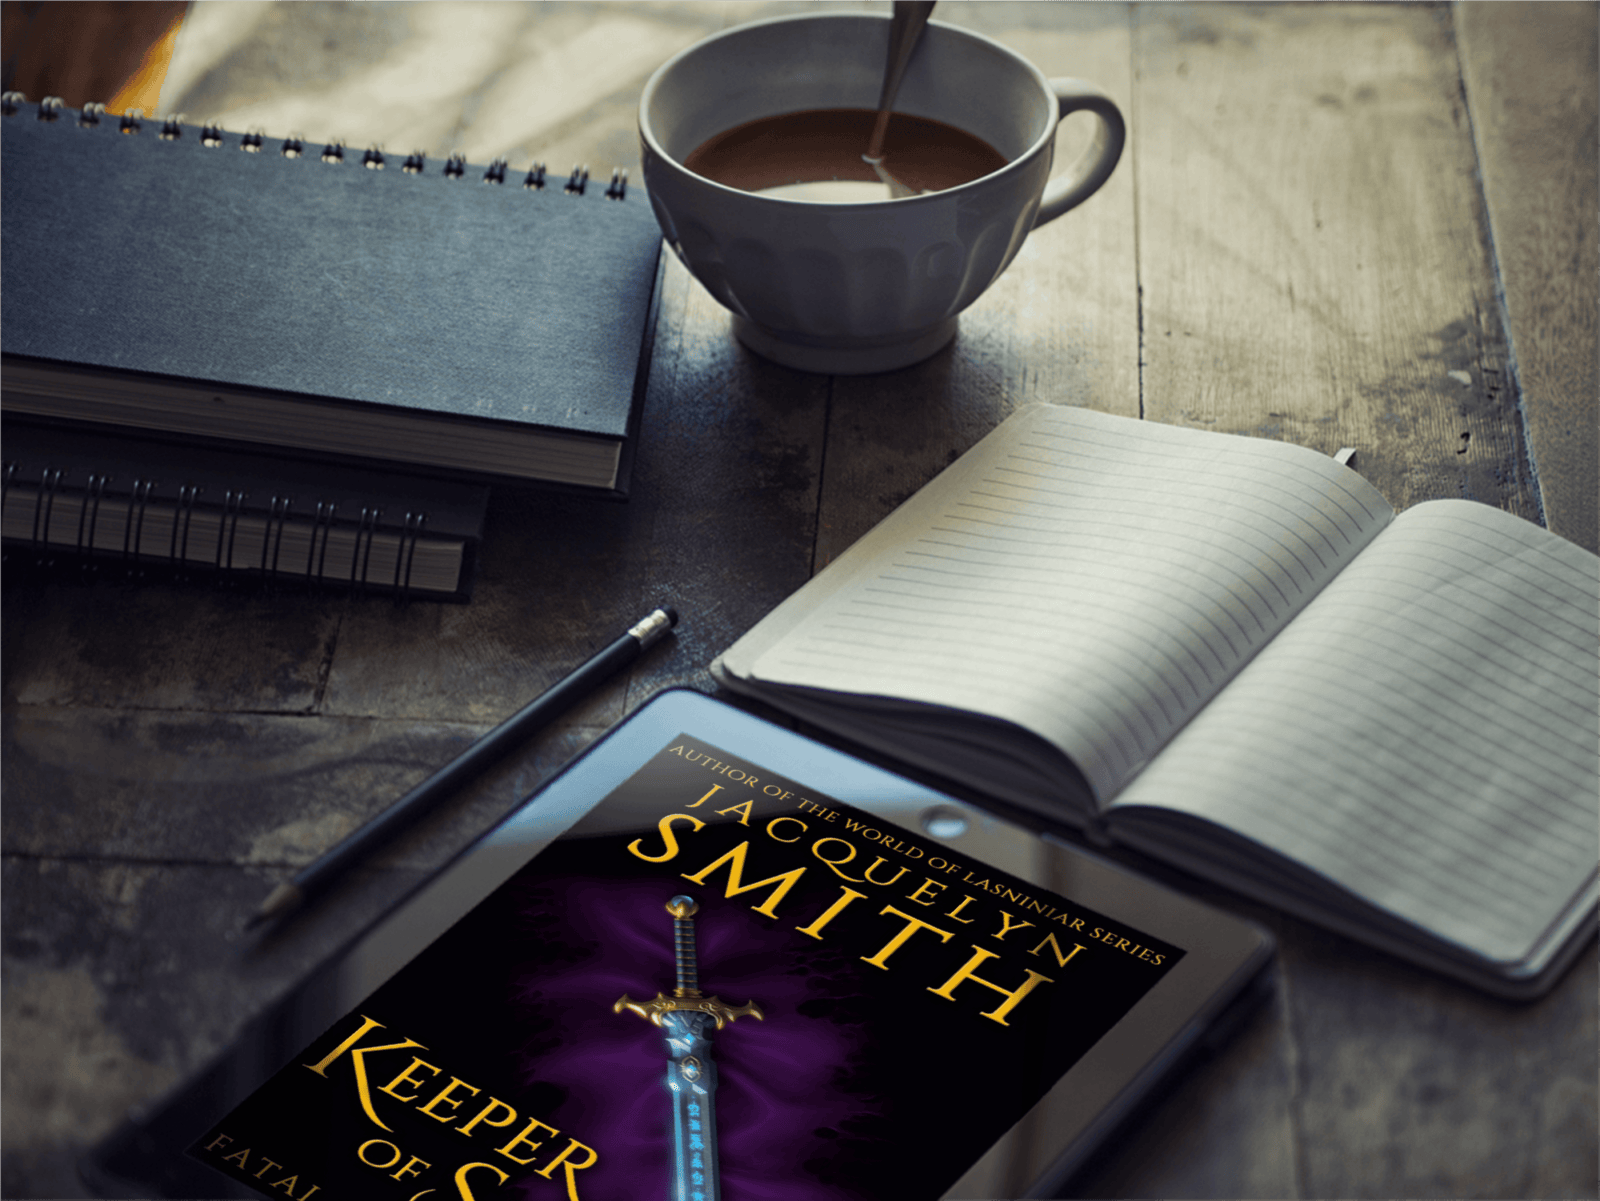 Keeper of Secrets Fatal Empire Book One ebook with notebooks and coffee